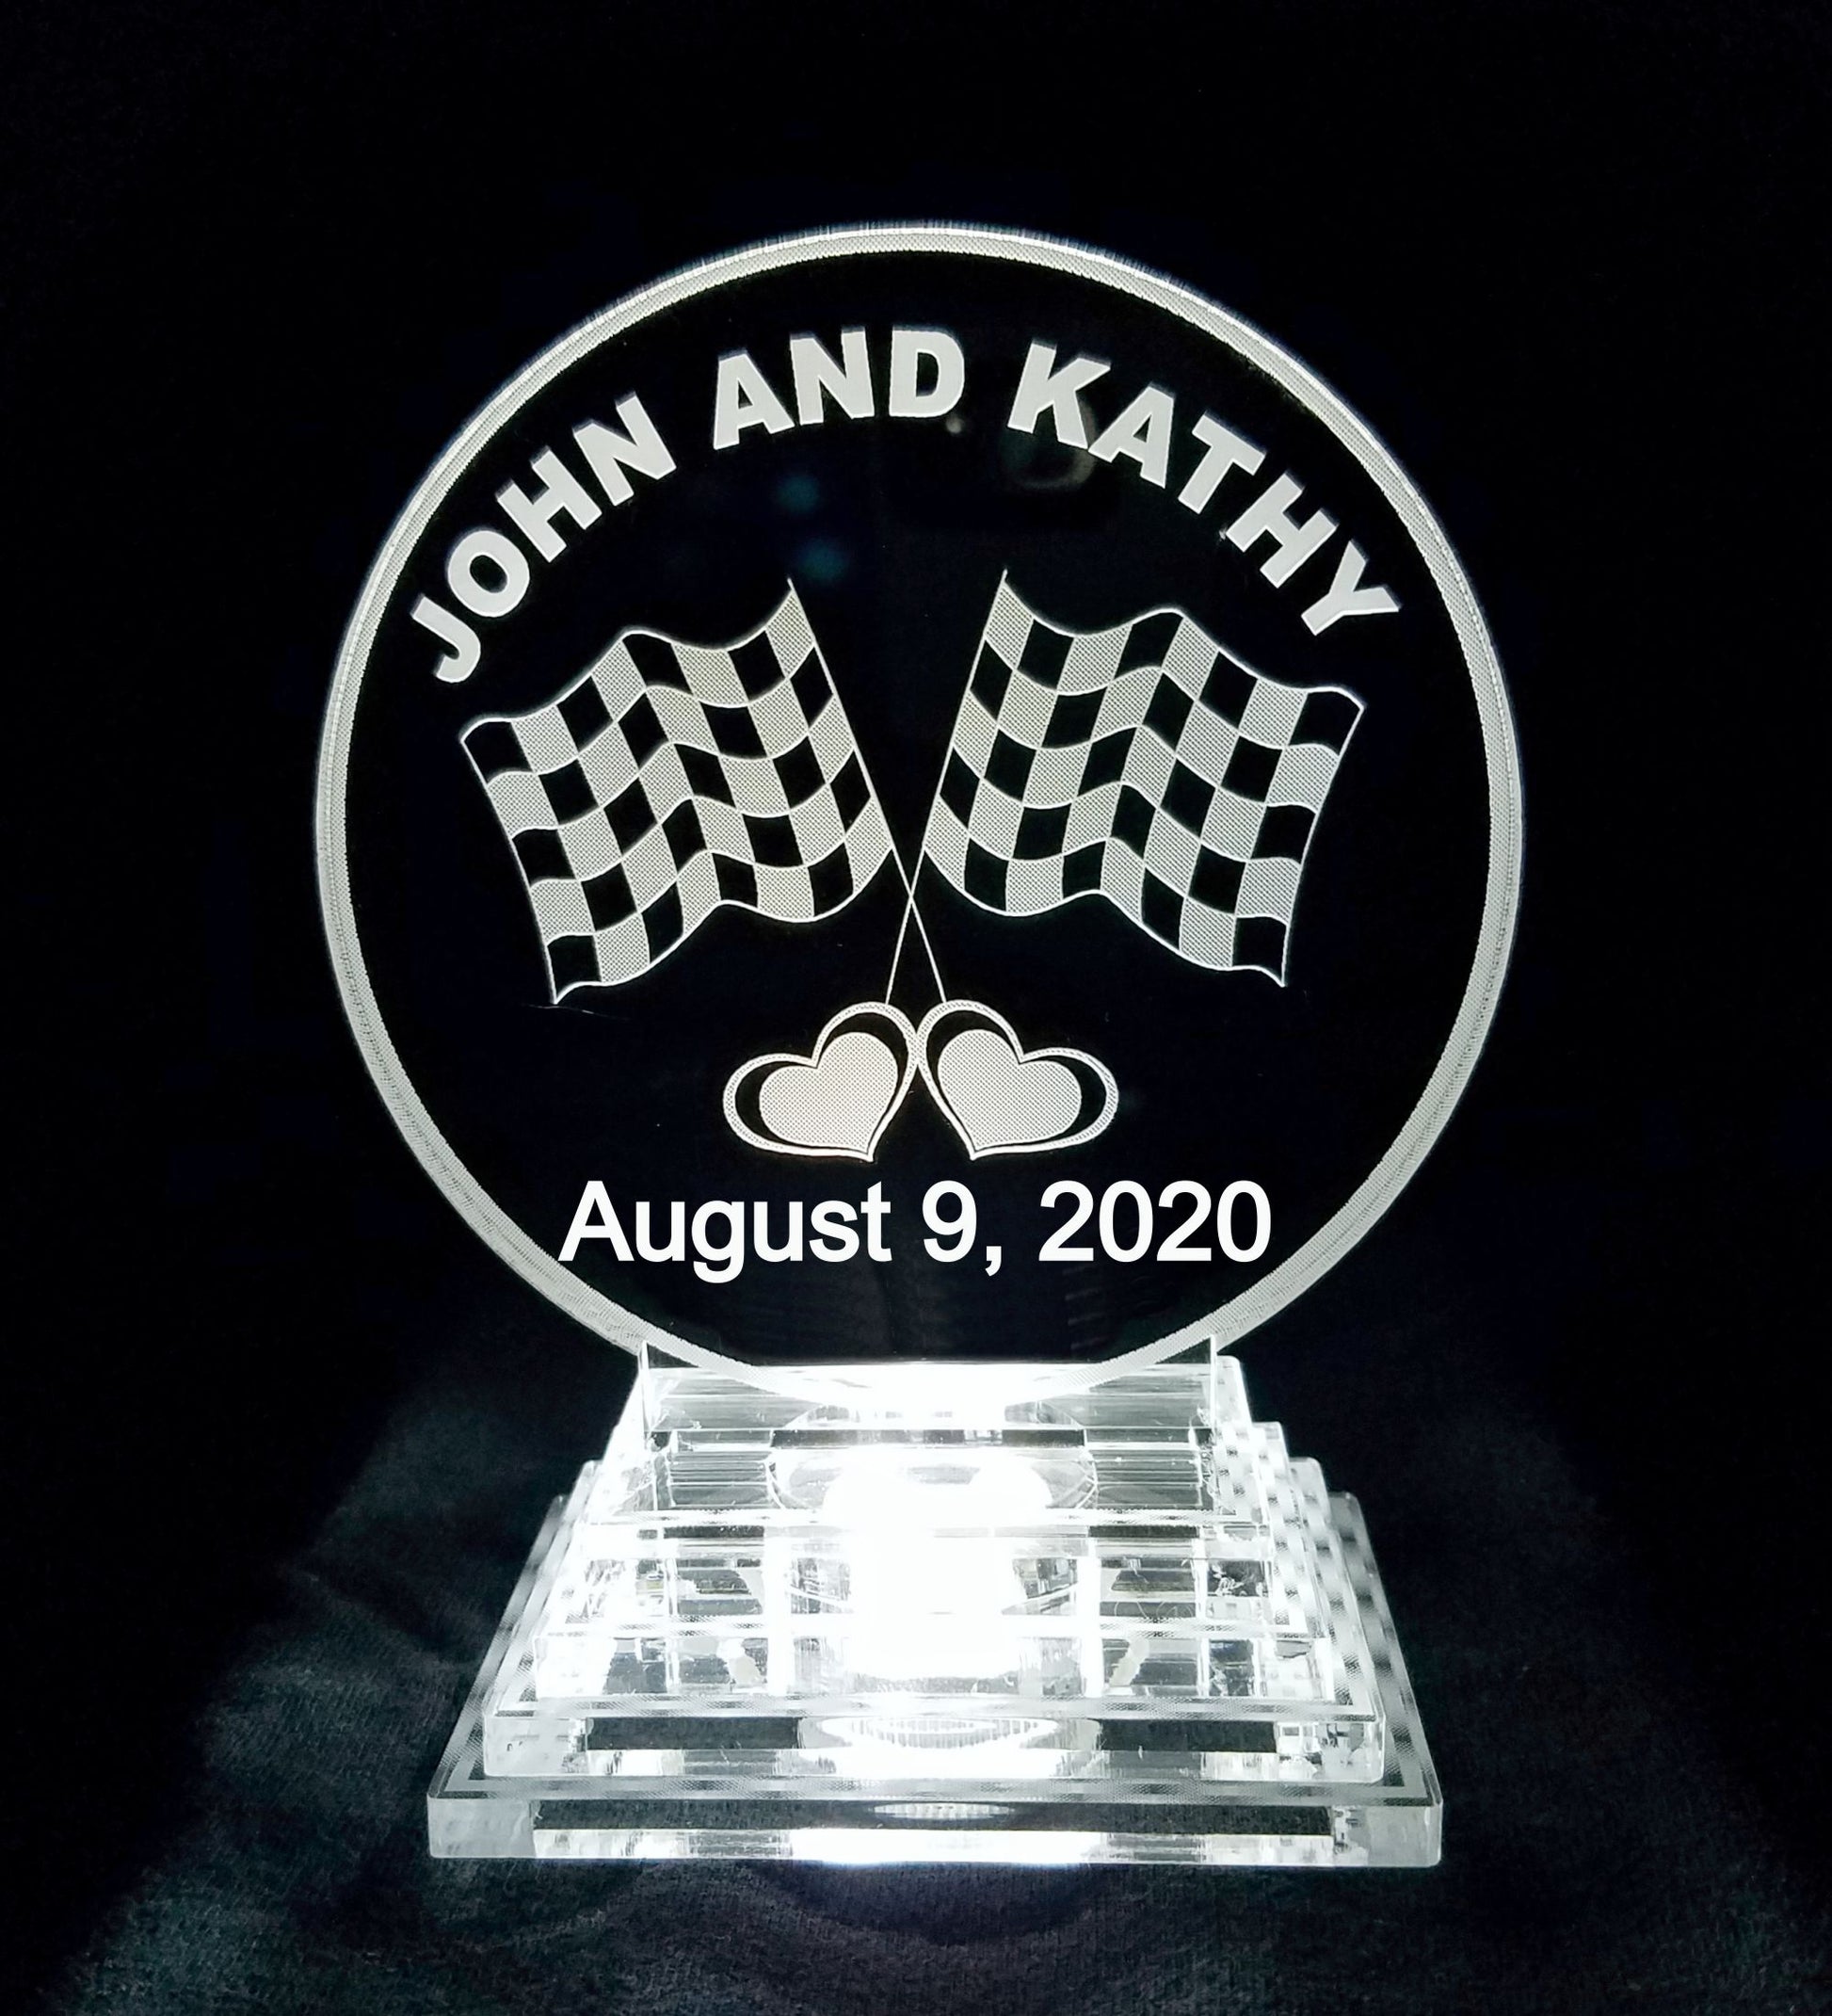 acrylic round cake topper decorated with a set of racing flags and engraved with names and date